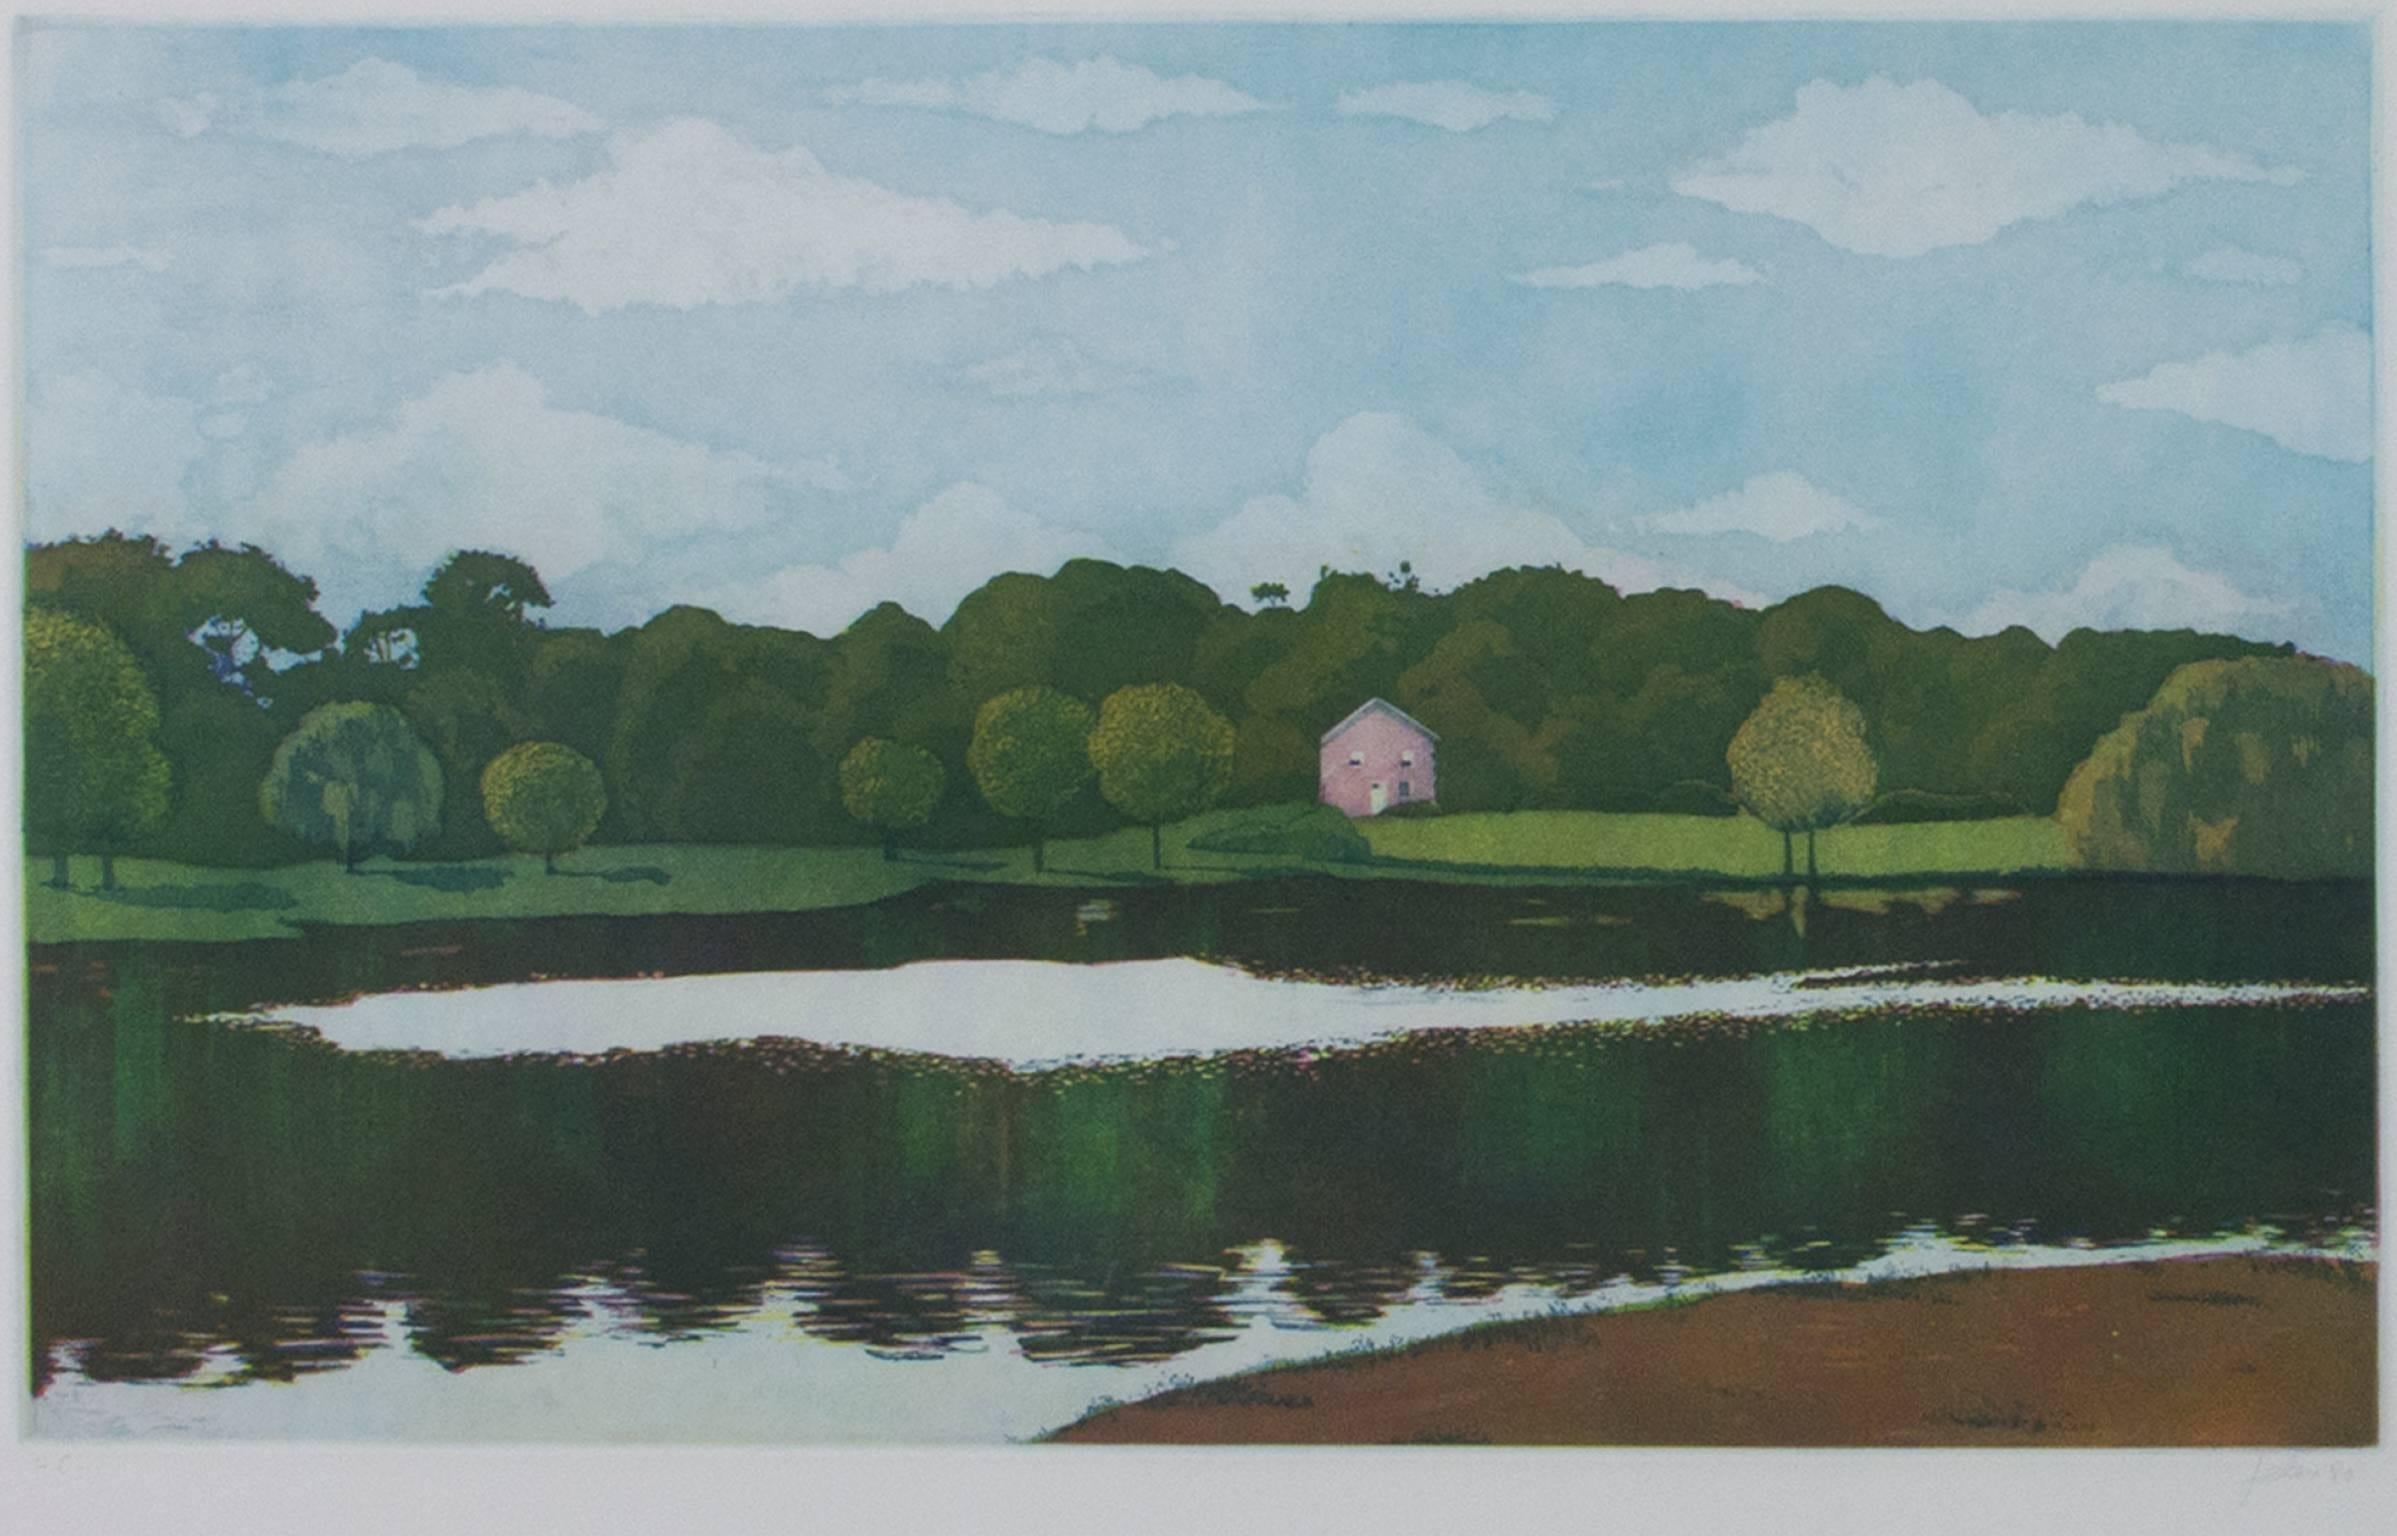 Unknown Landscape Print - 'Untitled (Pink House with Lake)' original aquatint by Nicolette Jelen